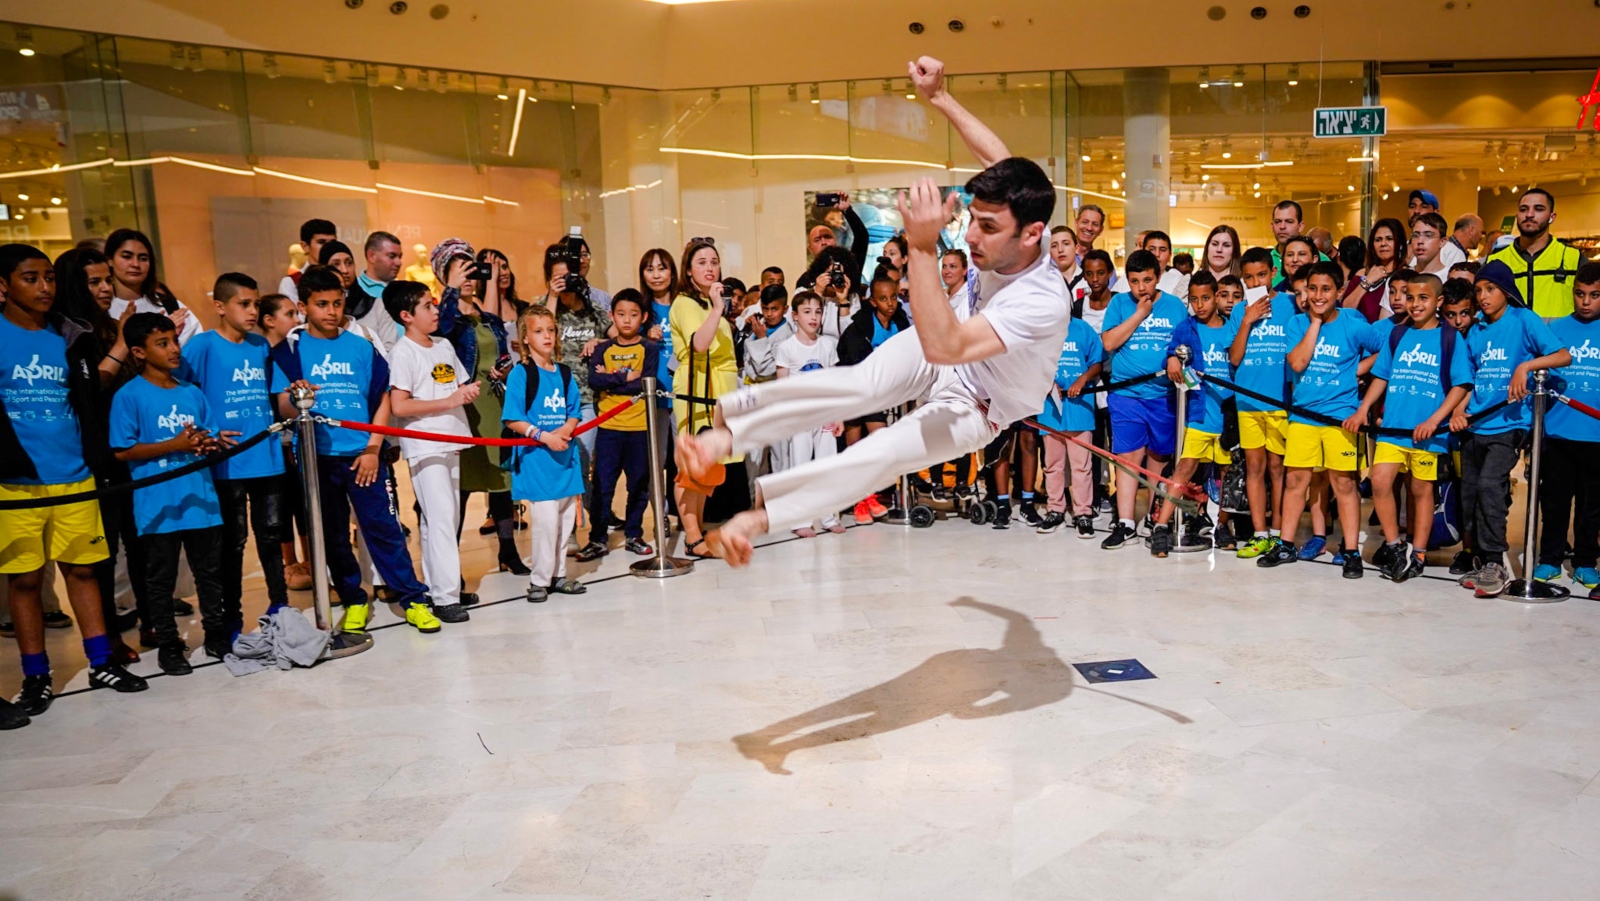 One of 10 sports activities in Israel at the International Day of Sport for Peace, April 6, 2019. Photo courtesy of ALLMEP